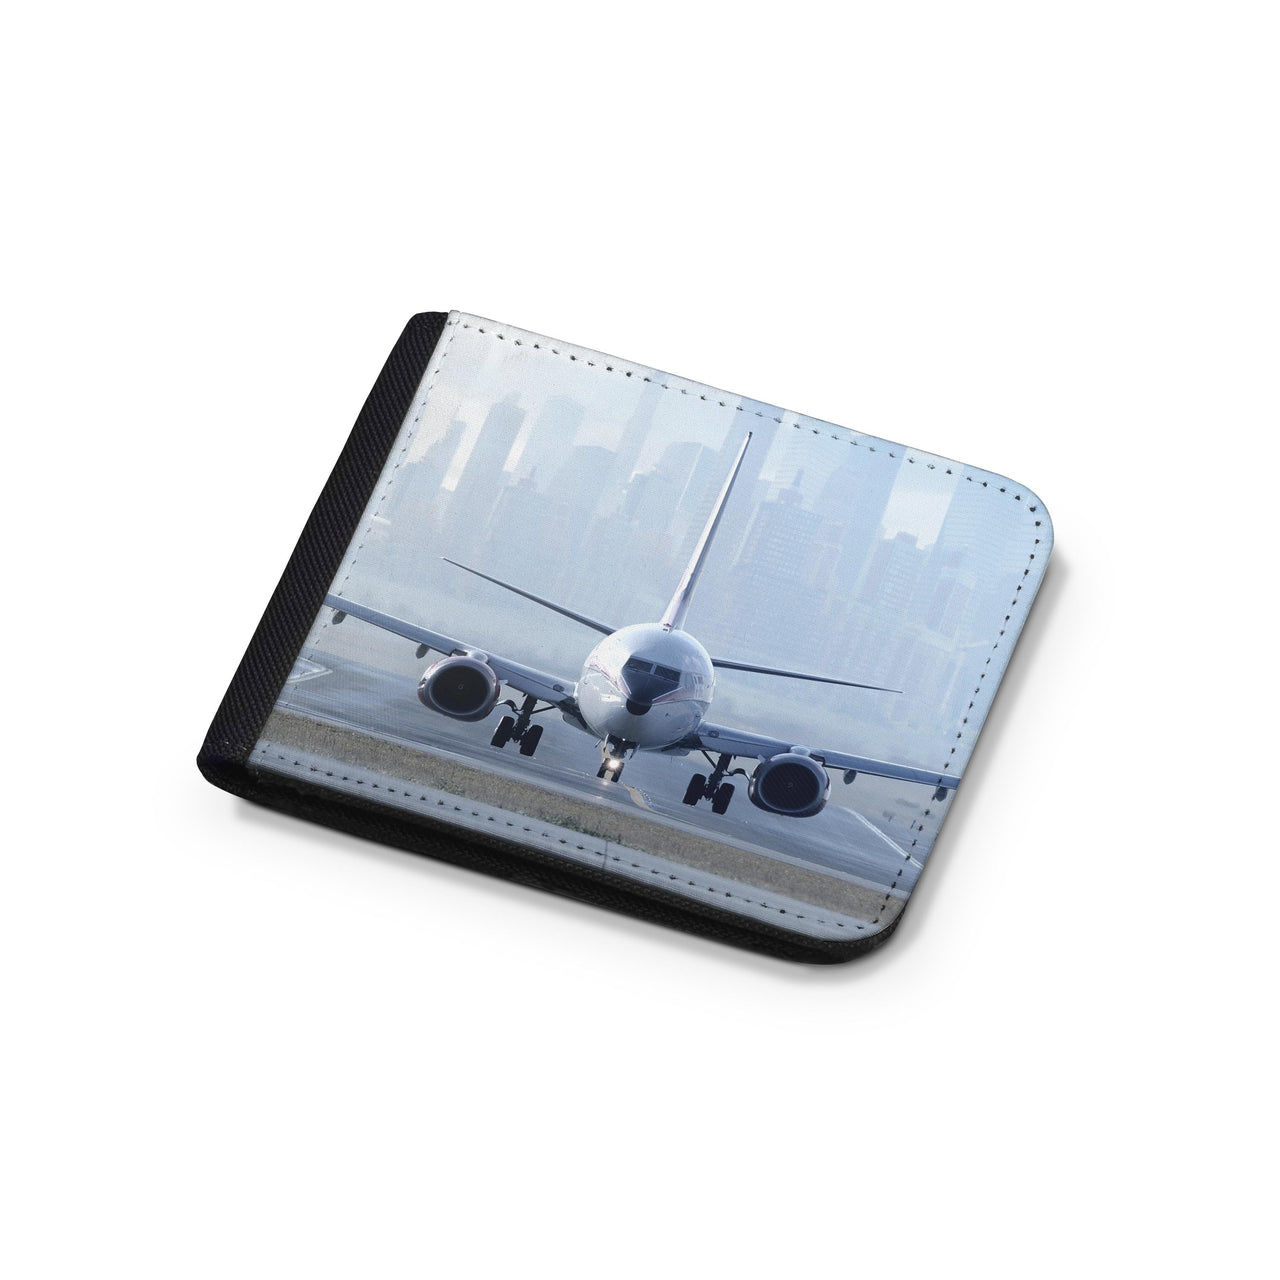 Boeing 737 & City View Behind Designed Wallets